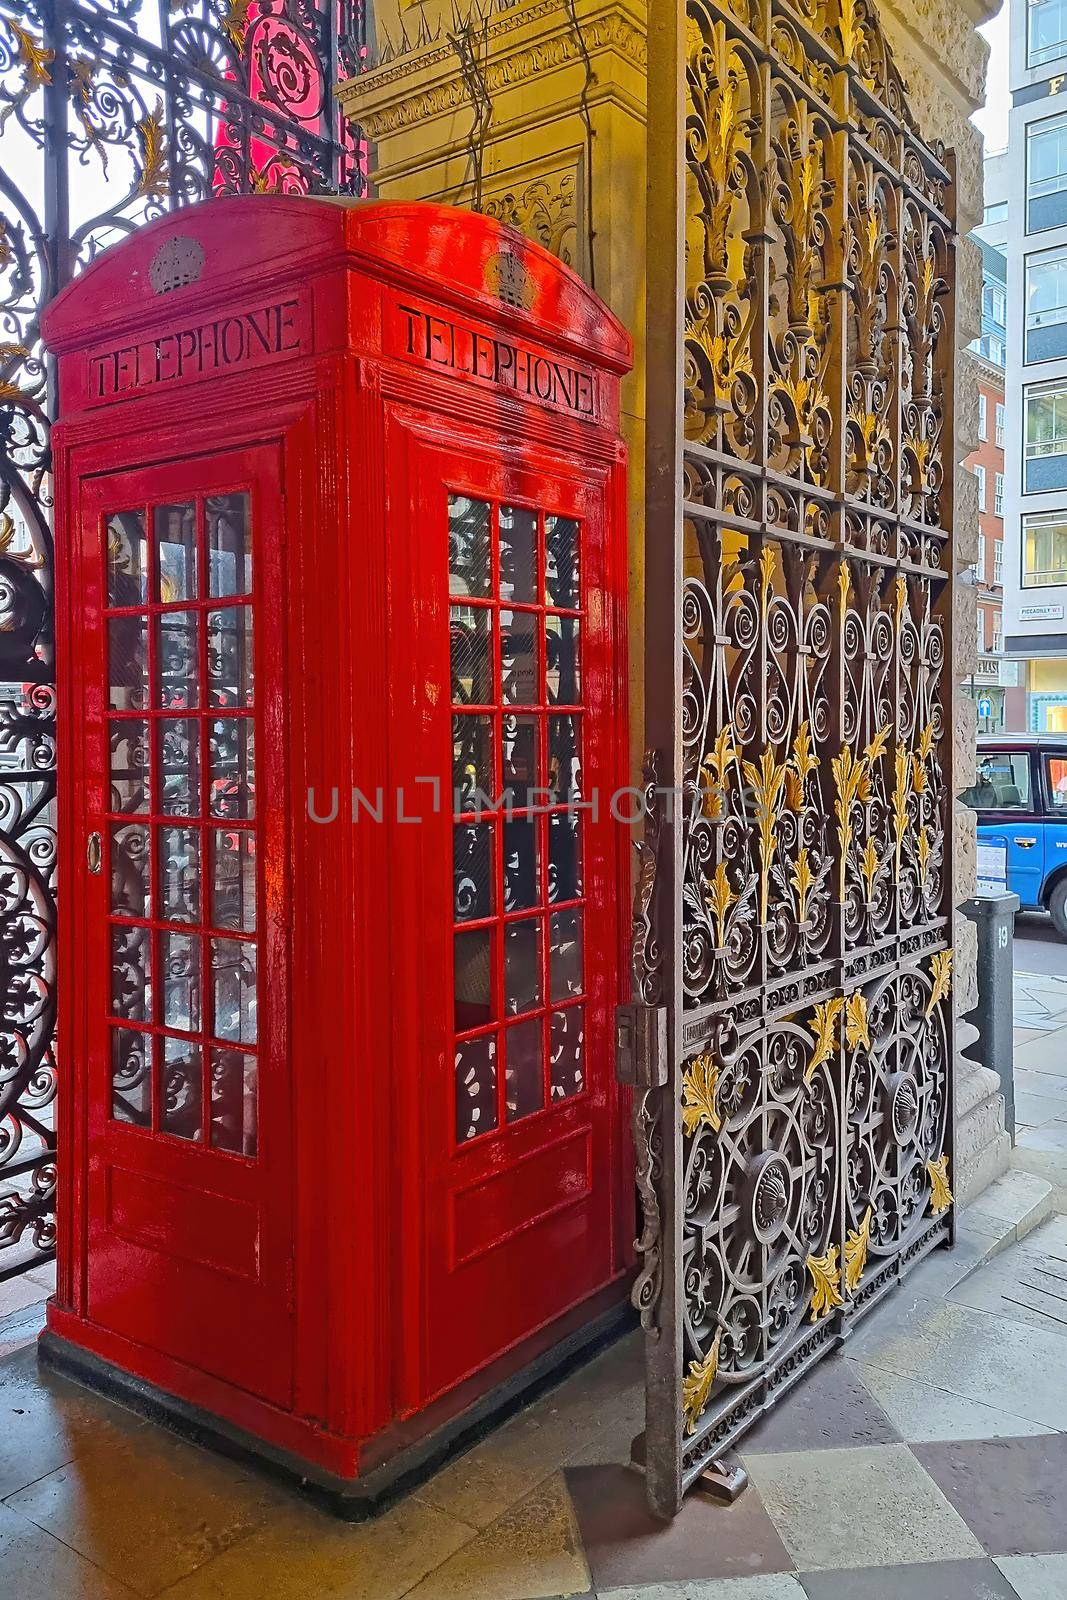 London, United Kingdom, February 6, 2022: the famous telephone booth on the streets of London. by kip02kas